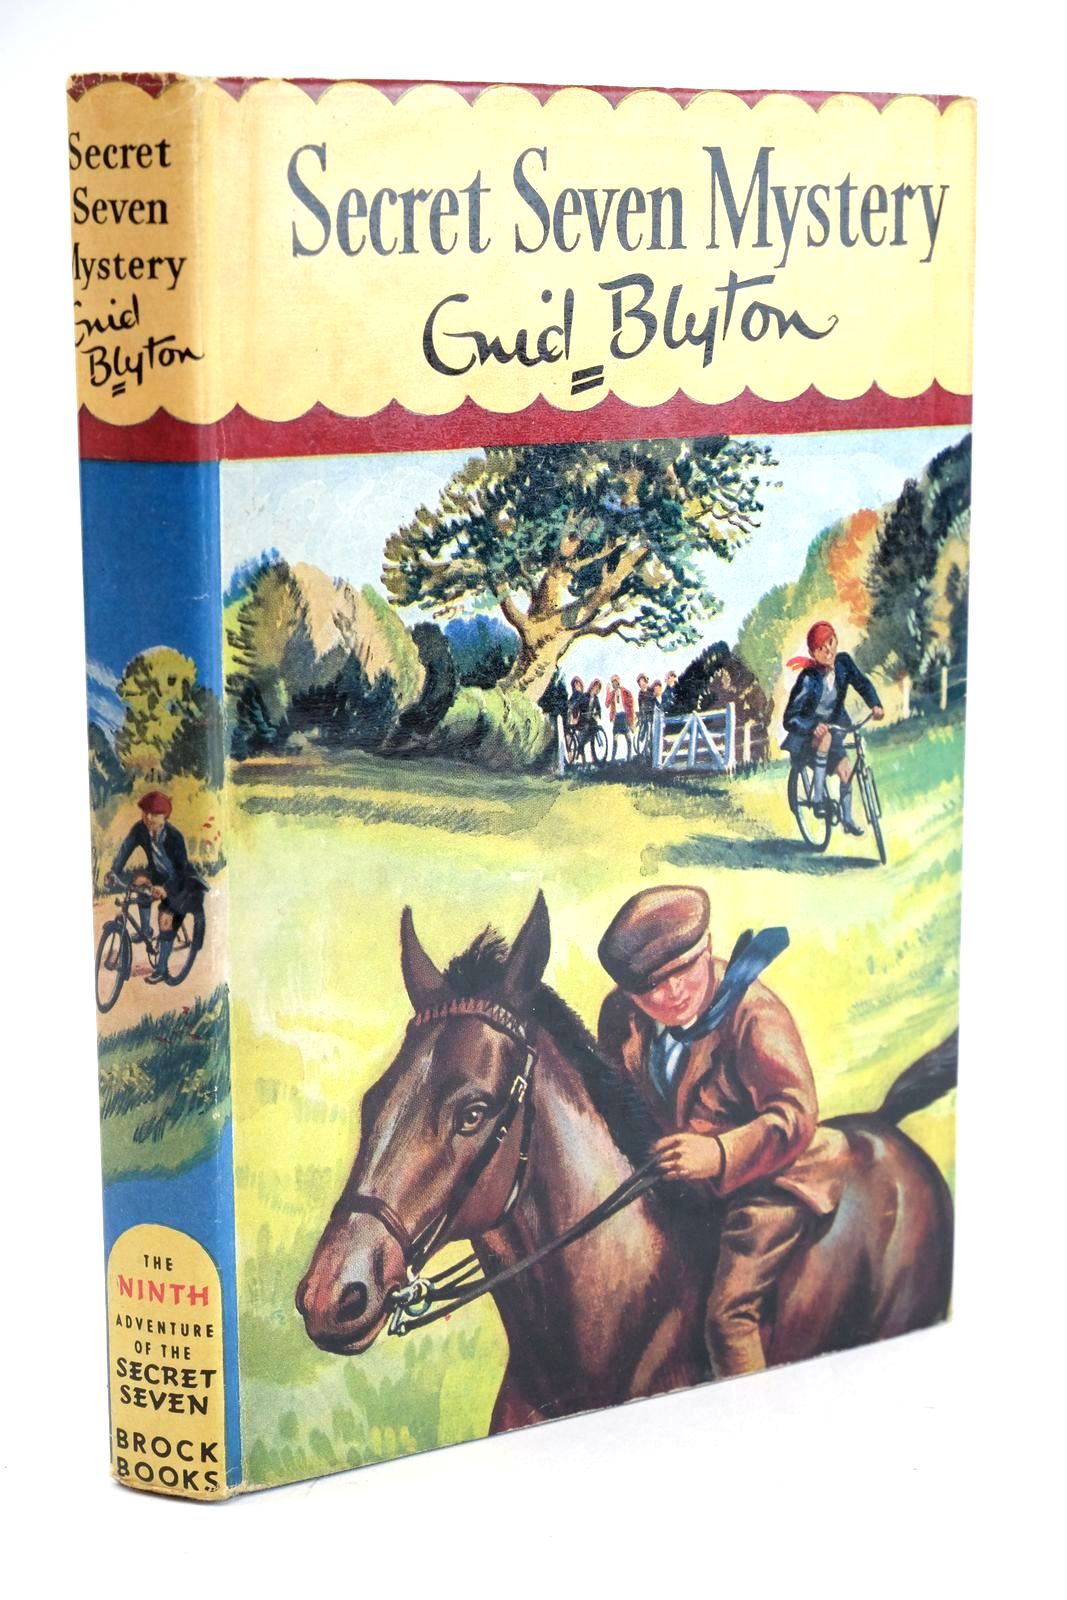 Photo of SECRET SEVEN MYSTERY written by Blyton, Enid illustrated by Sharrocks, Burgess published by Brockhampton Press (STOCK CODE: 1324547)  for sale by Stella & Rose's Books